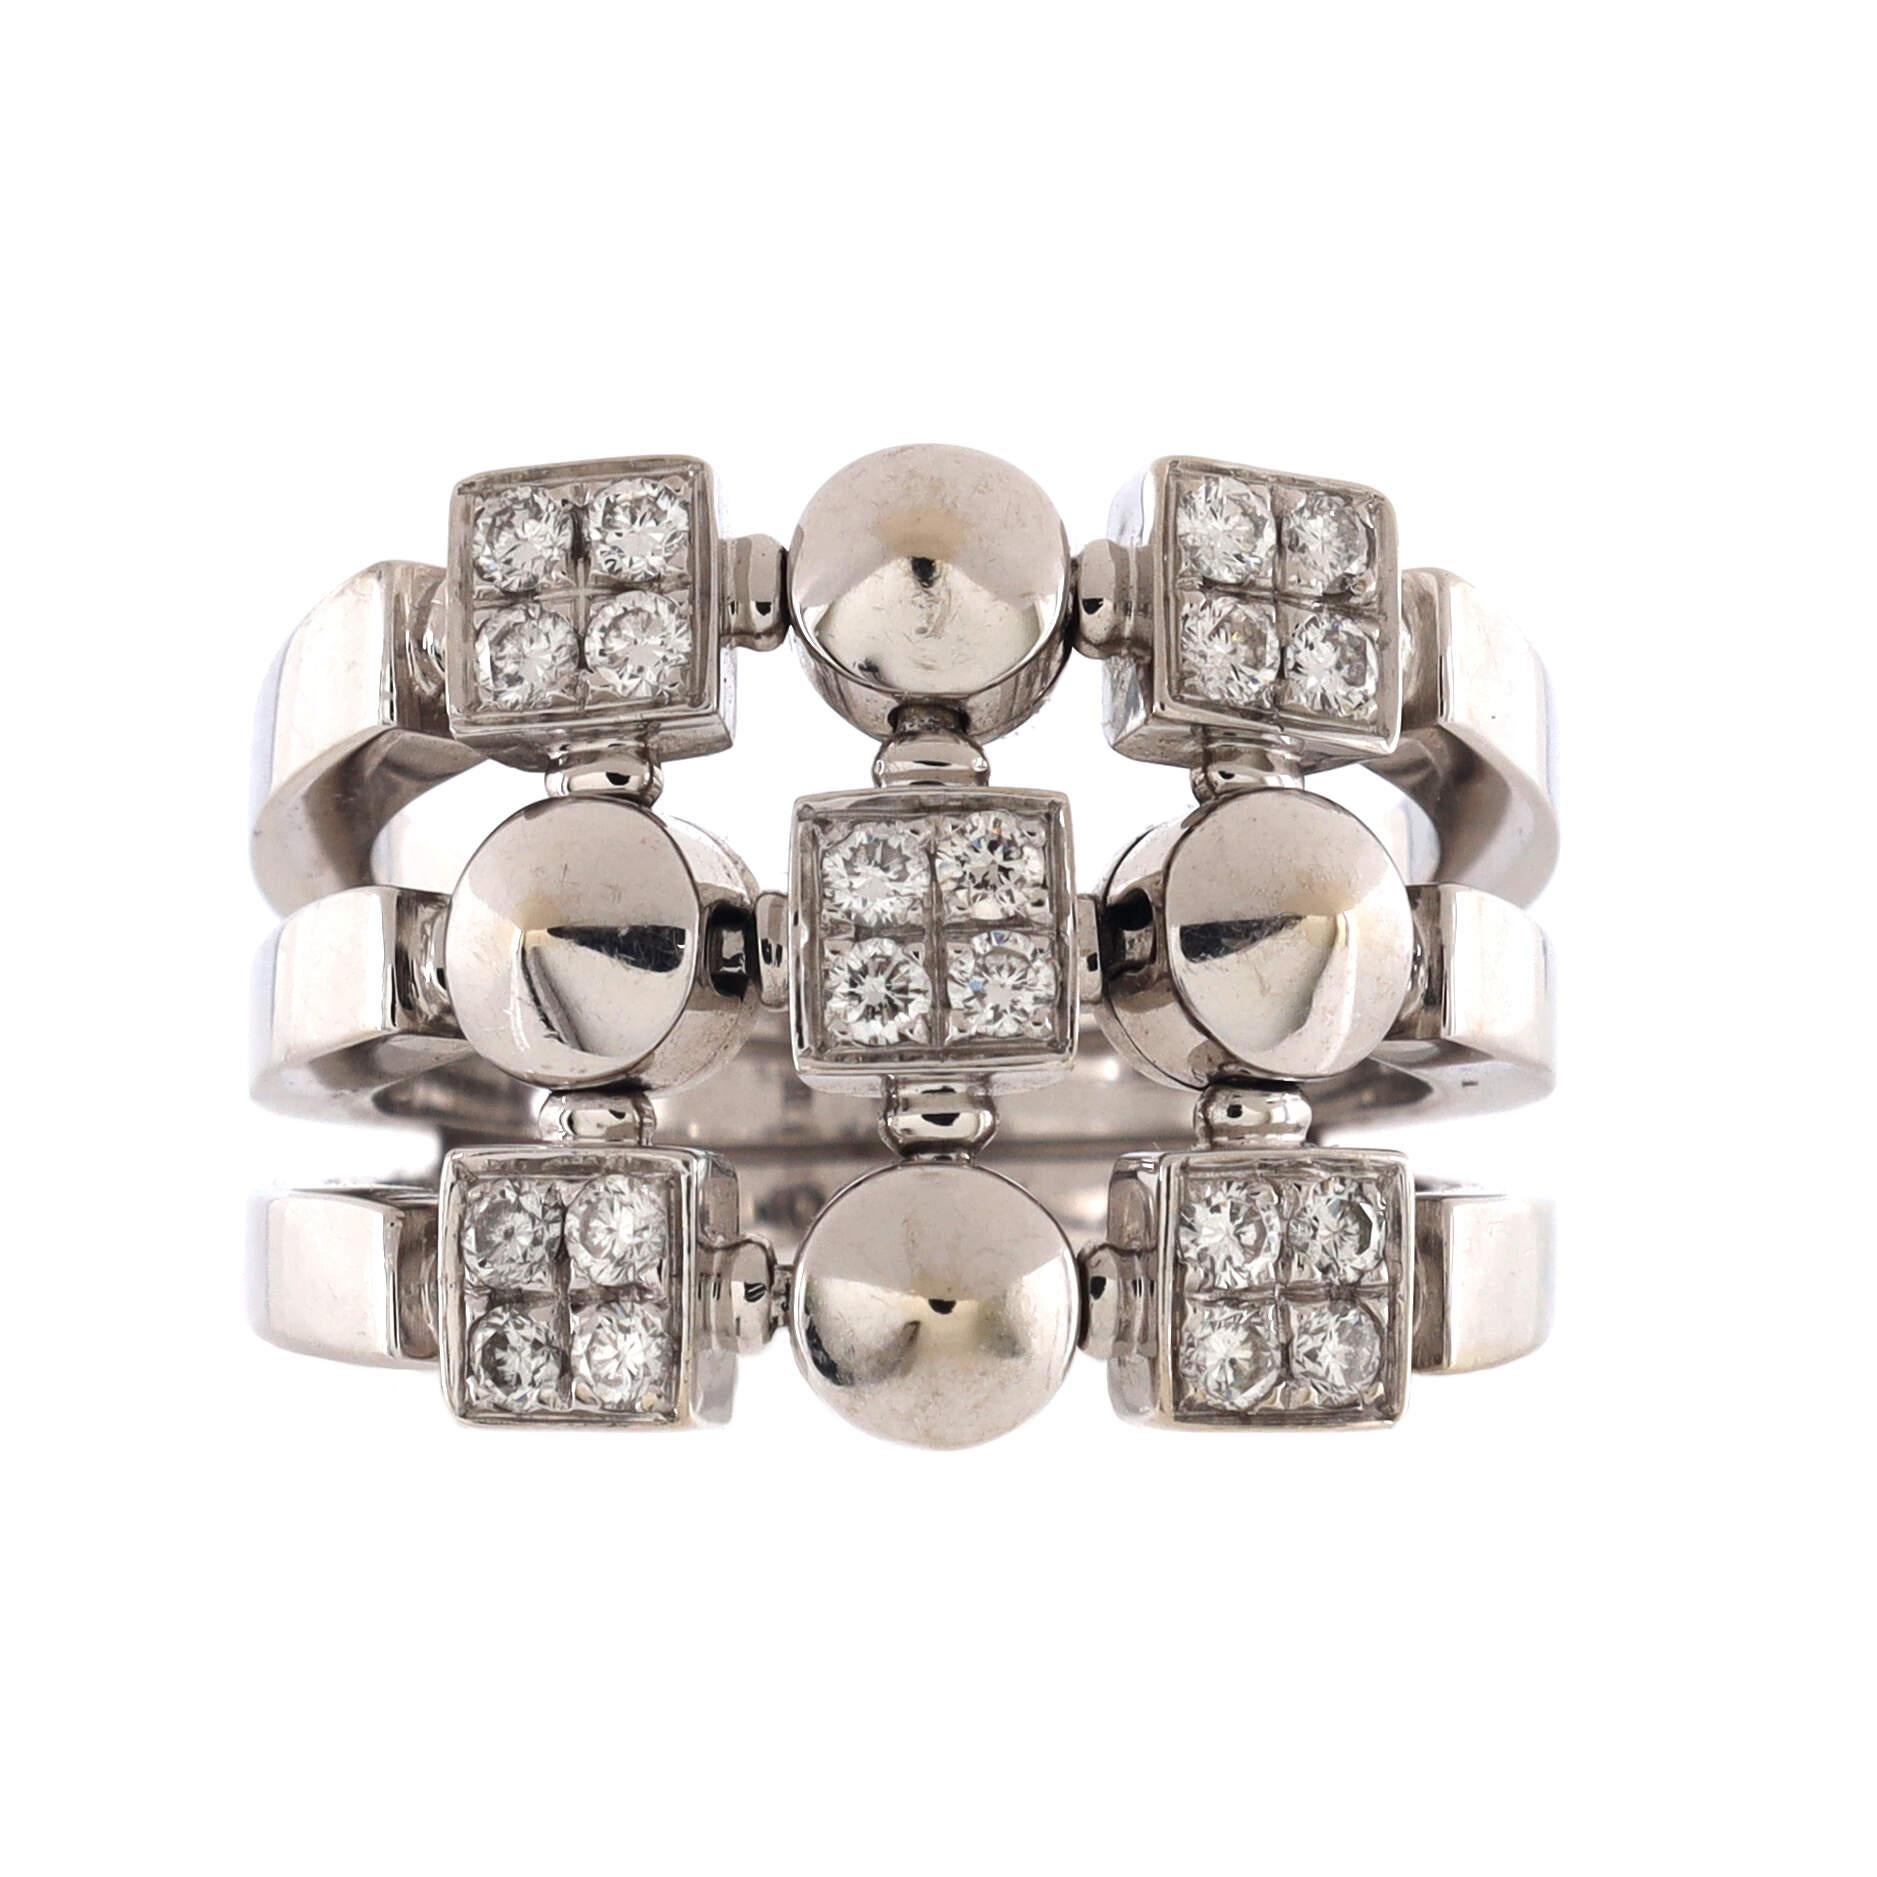 Condition: Very good. Moderate wear throughout.
Accessories: No Accessories
Measurements: Size: 6.5, Width: 6.25 mm
Designer: Bvlgari
Model: Three Row Lucea Ring 18K White Gold with Diamonds
Exterior Color: White Gold
Item Number: 188470/64